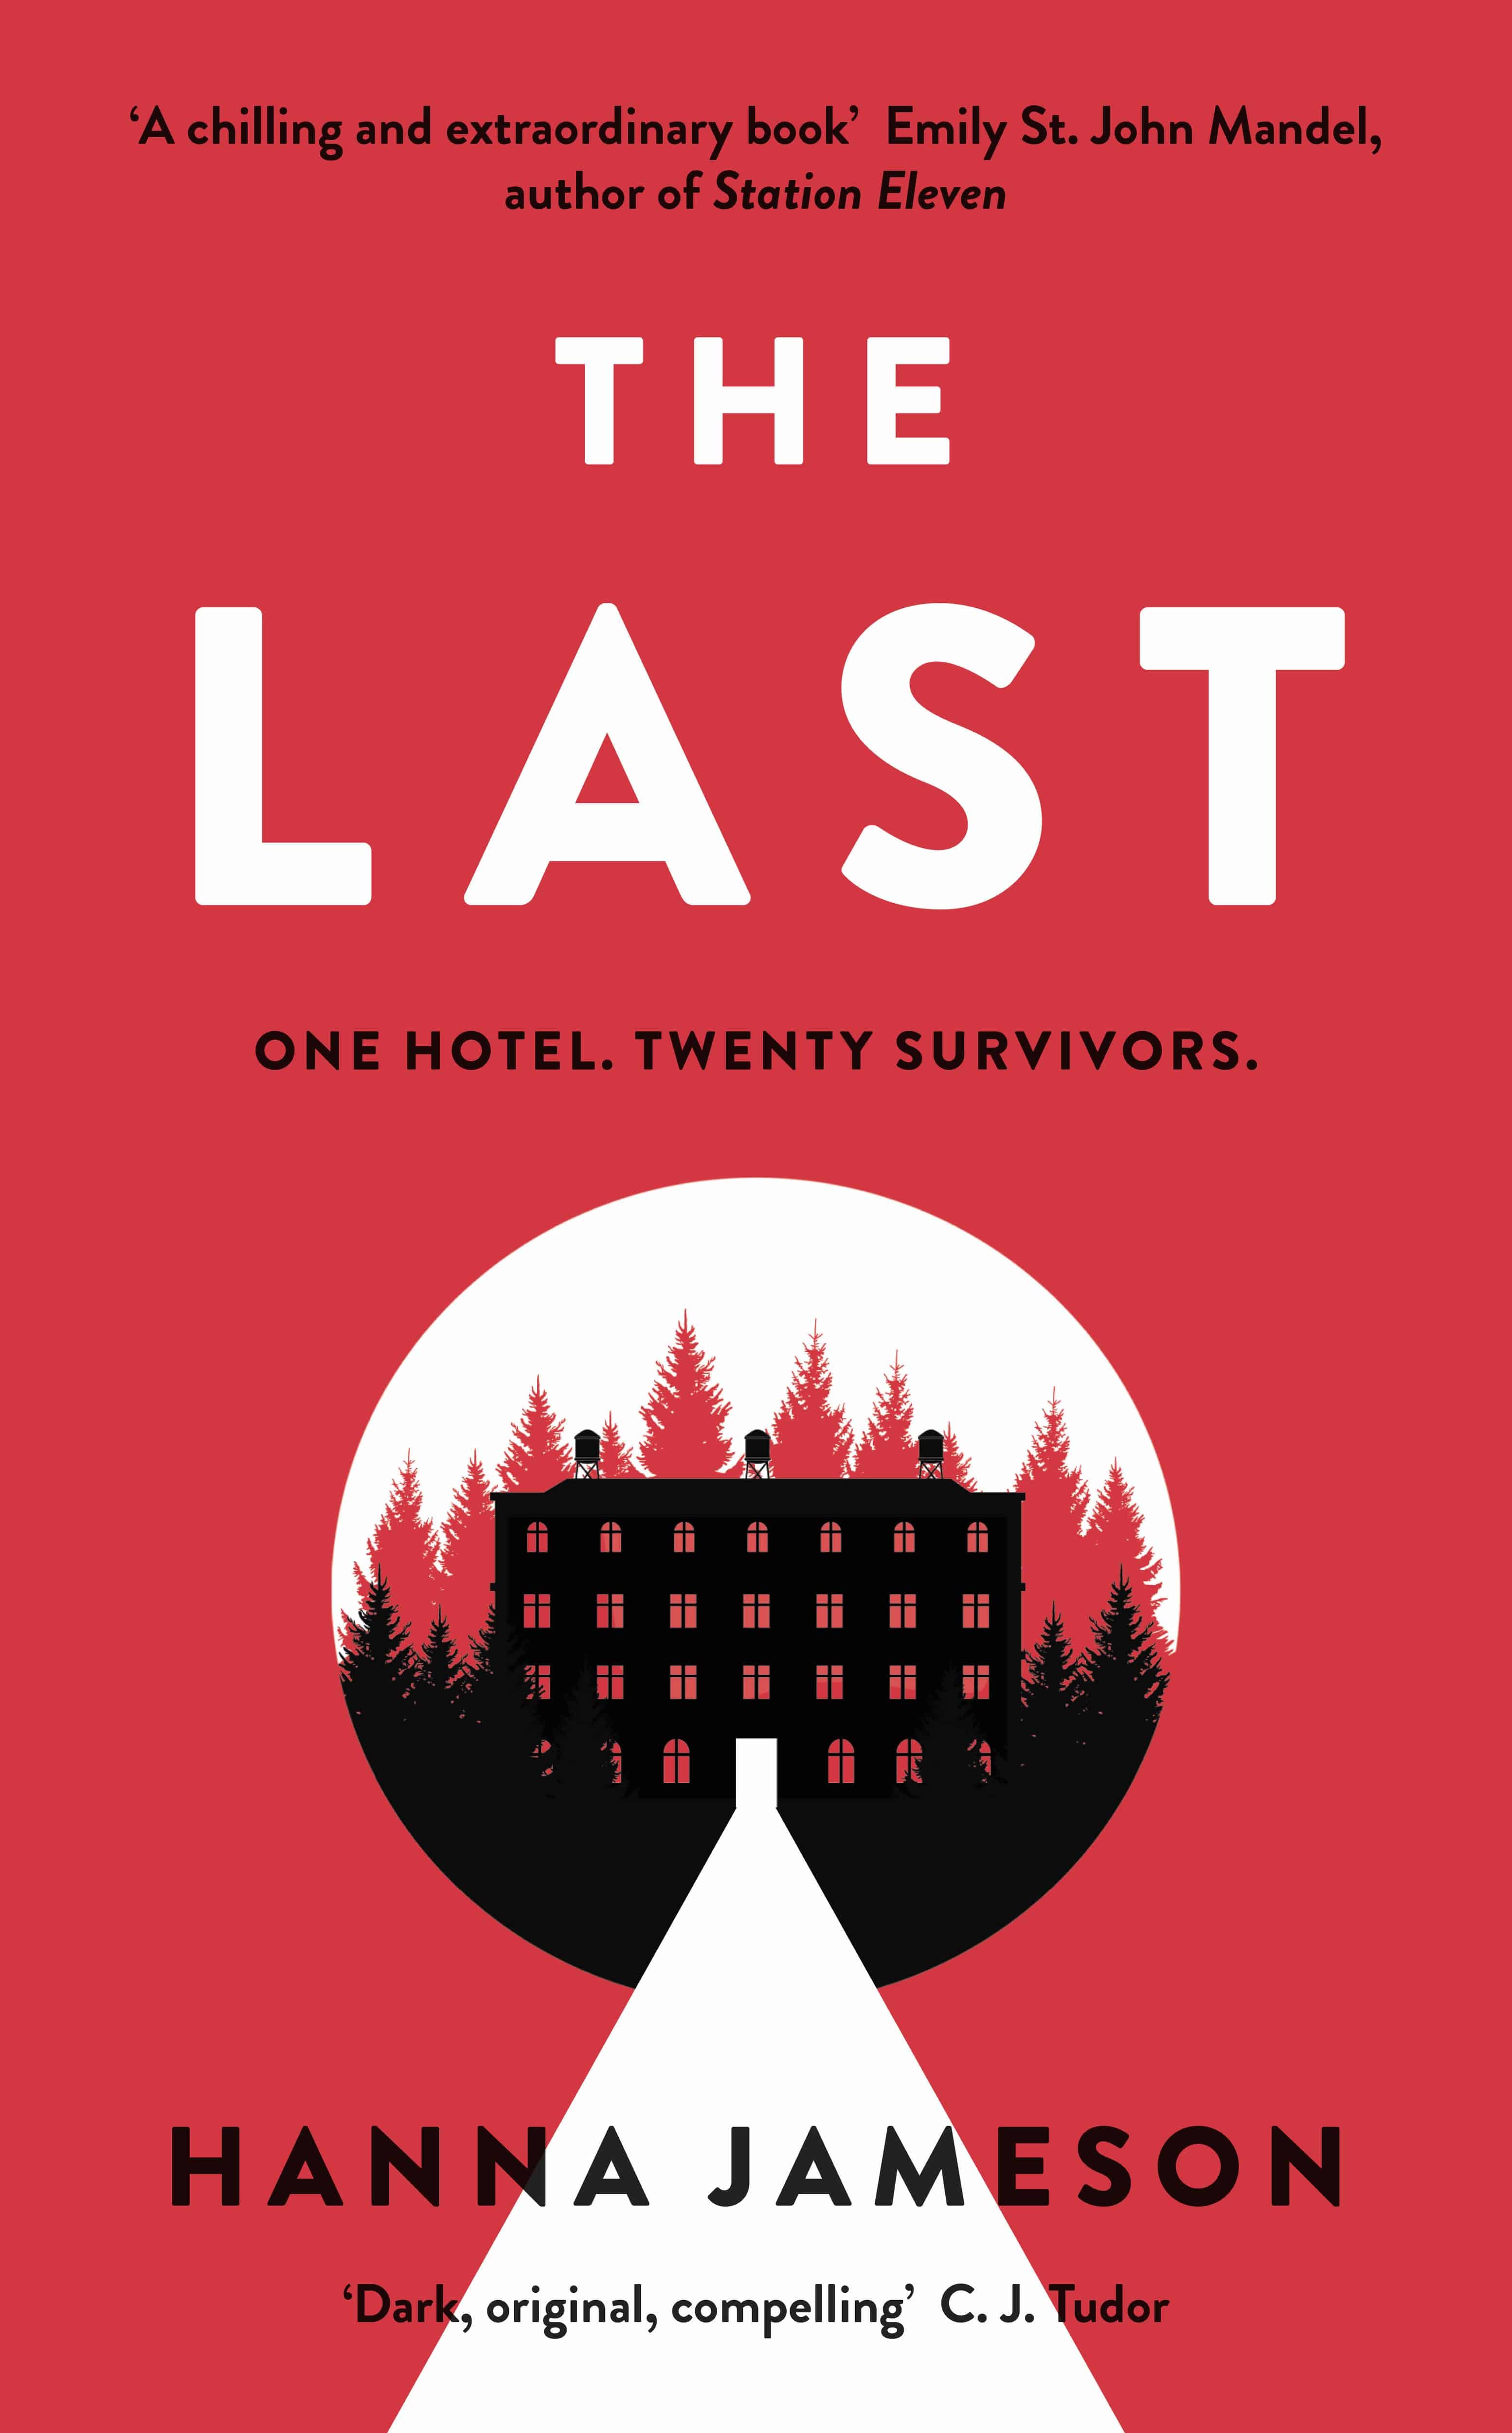 Book jacket of The Last by Hanna Jameson